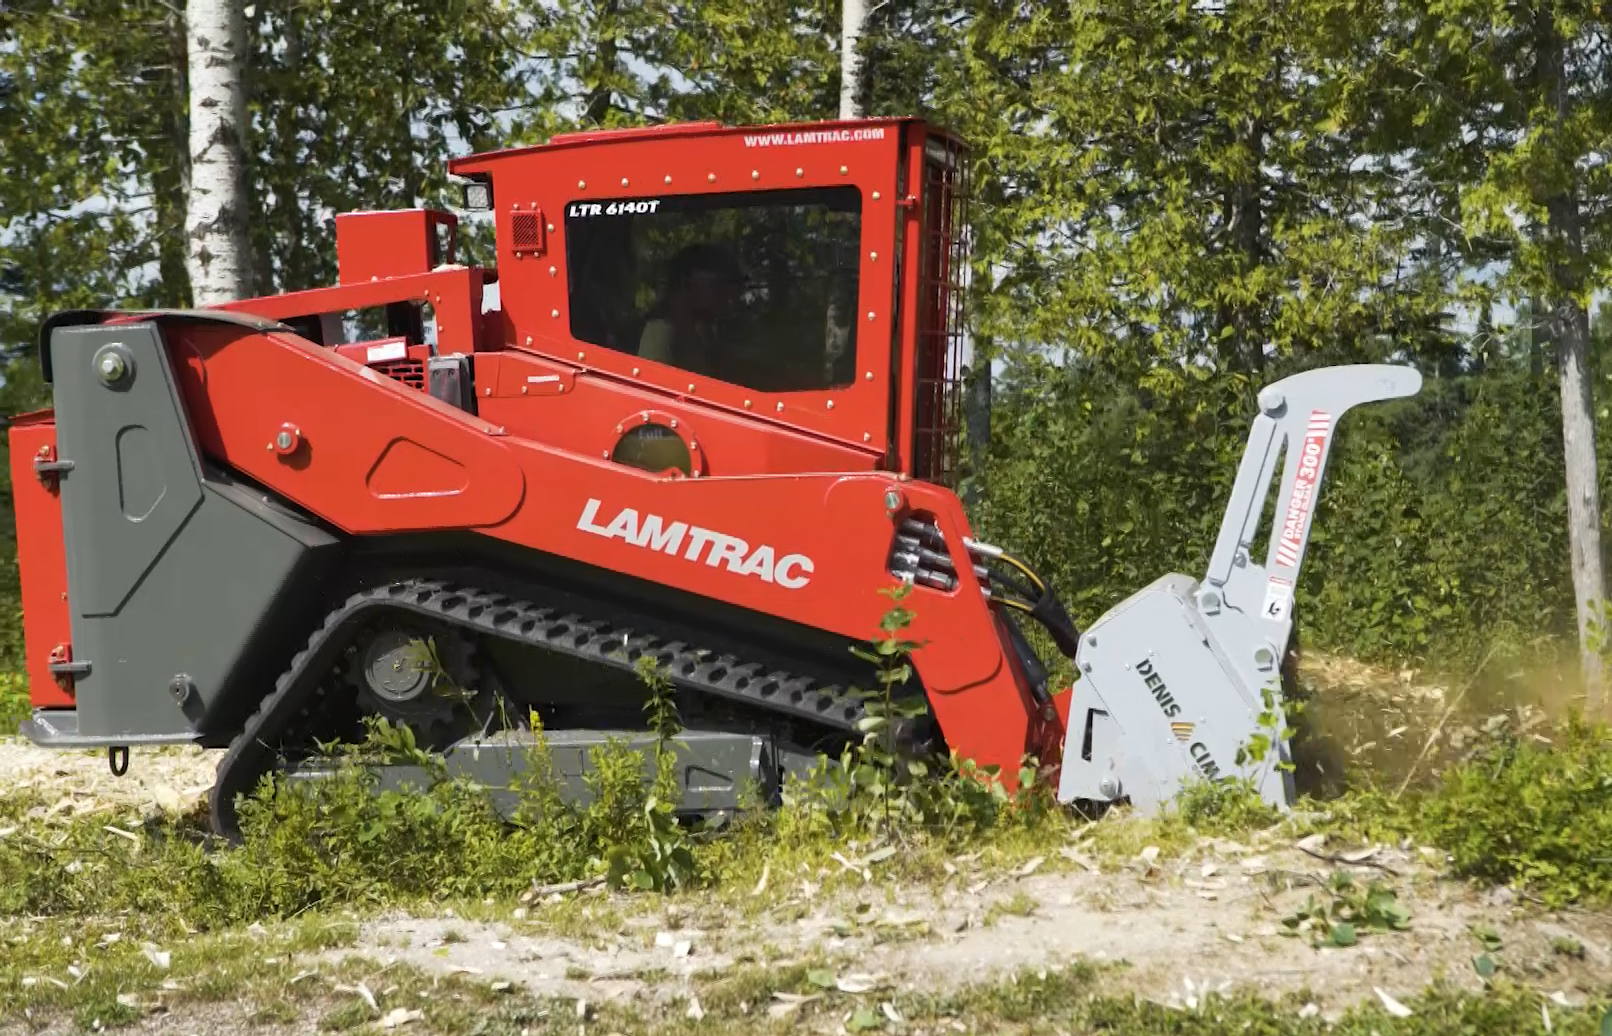 Land Clearing Equipment Dealers: Trustworthy Suppliers